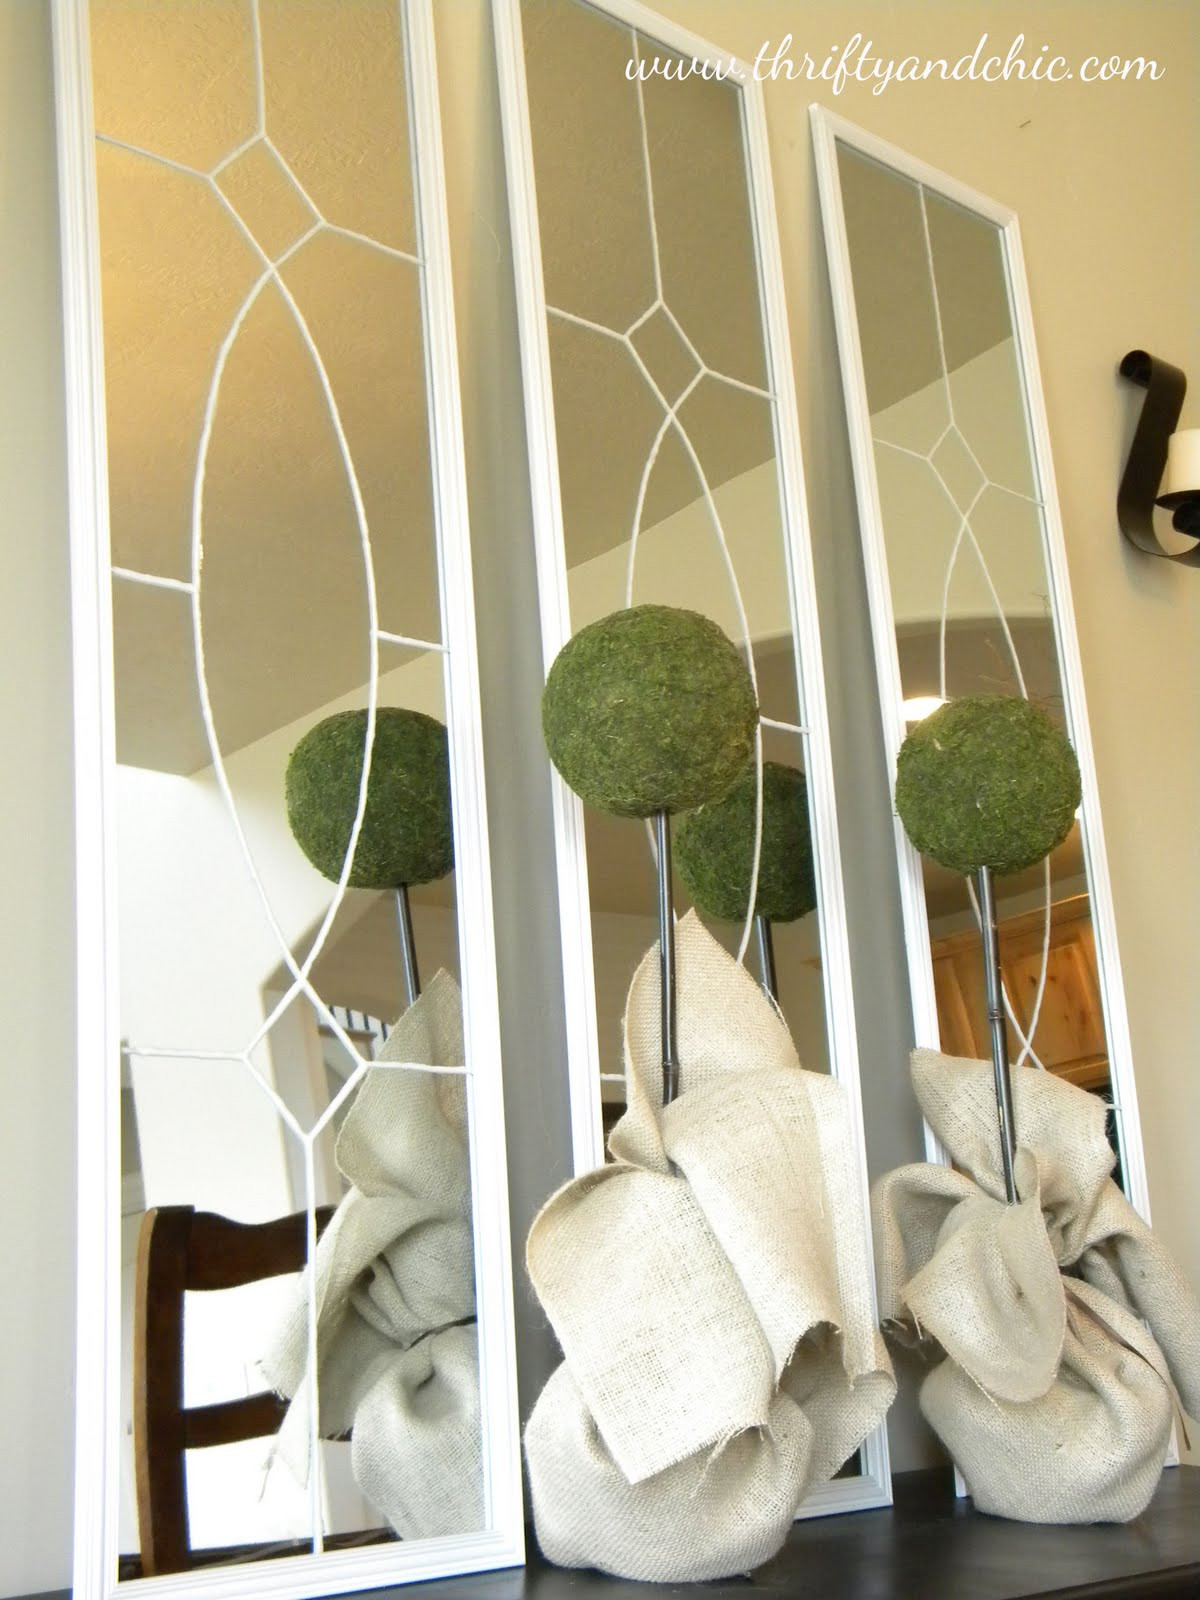 DIY Decorative Mirrors
 Thrifty and Chic DIY Projects and Home Decor